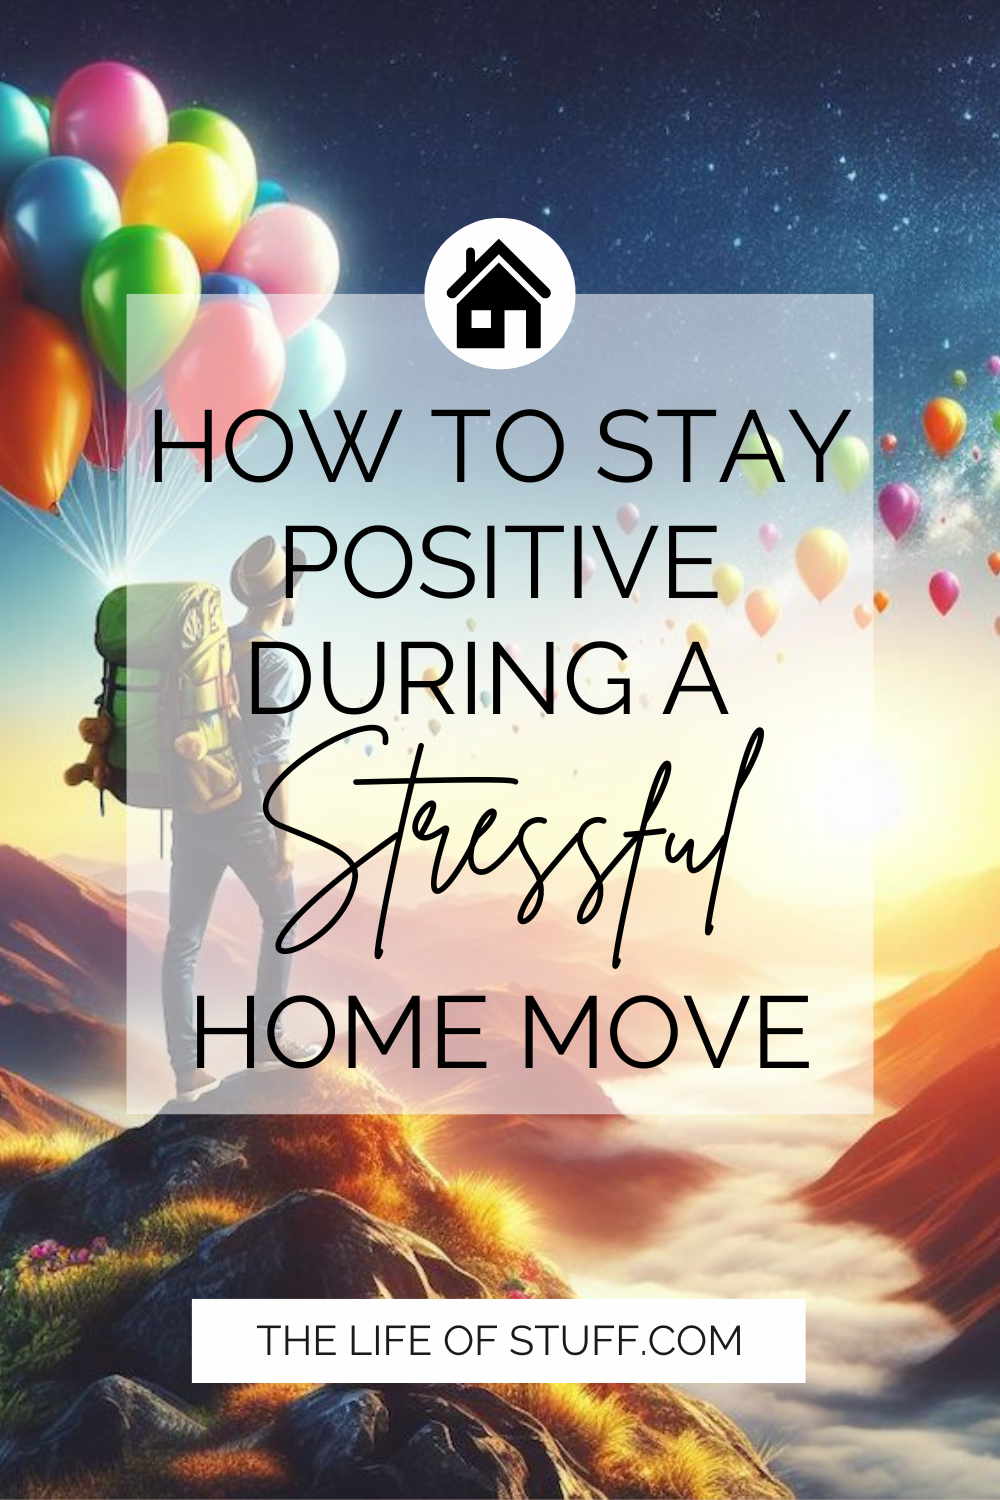 How To Stay Positive During a Stressful Home Move - The Life of Stuff